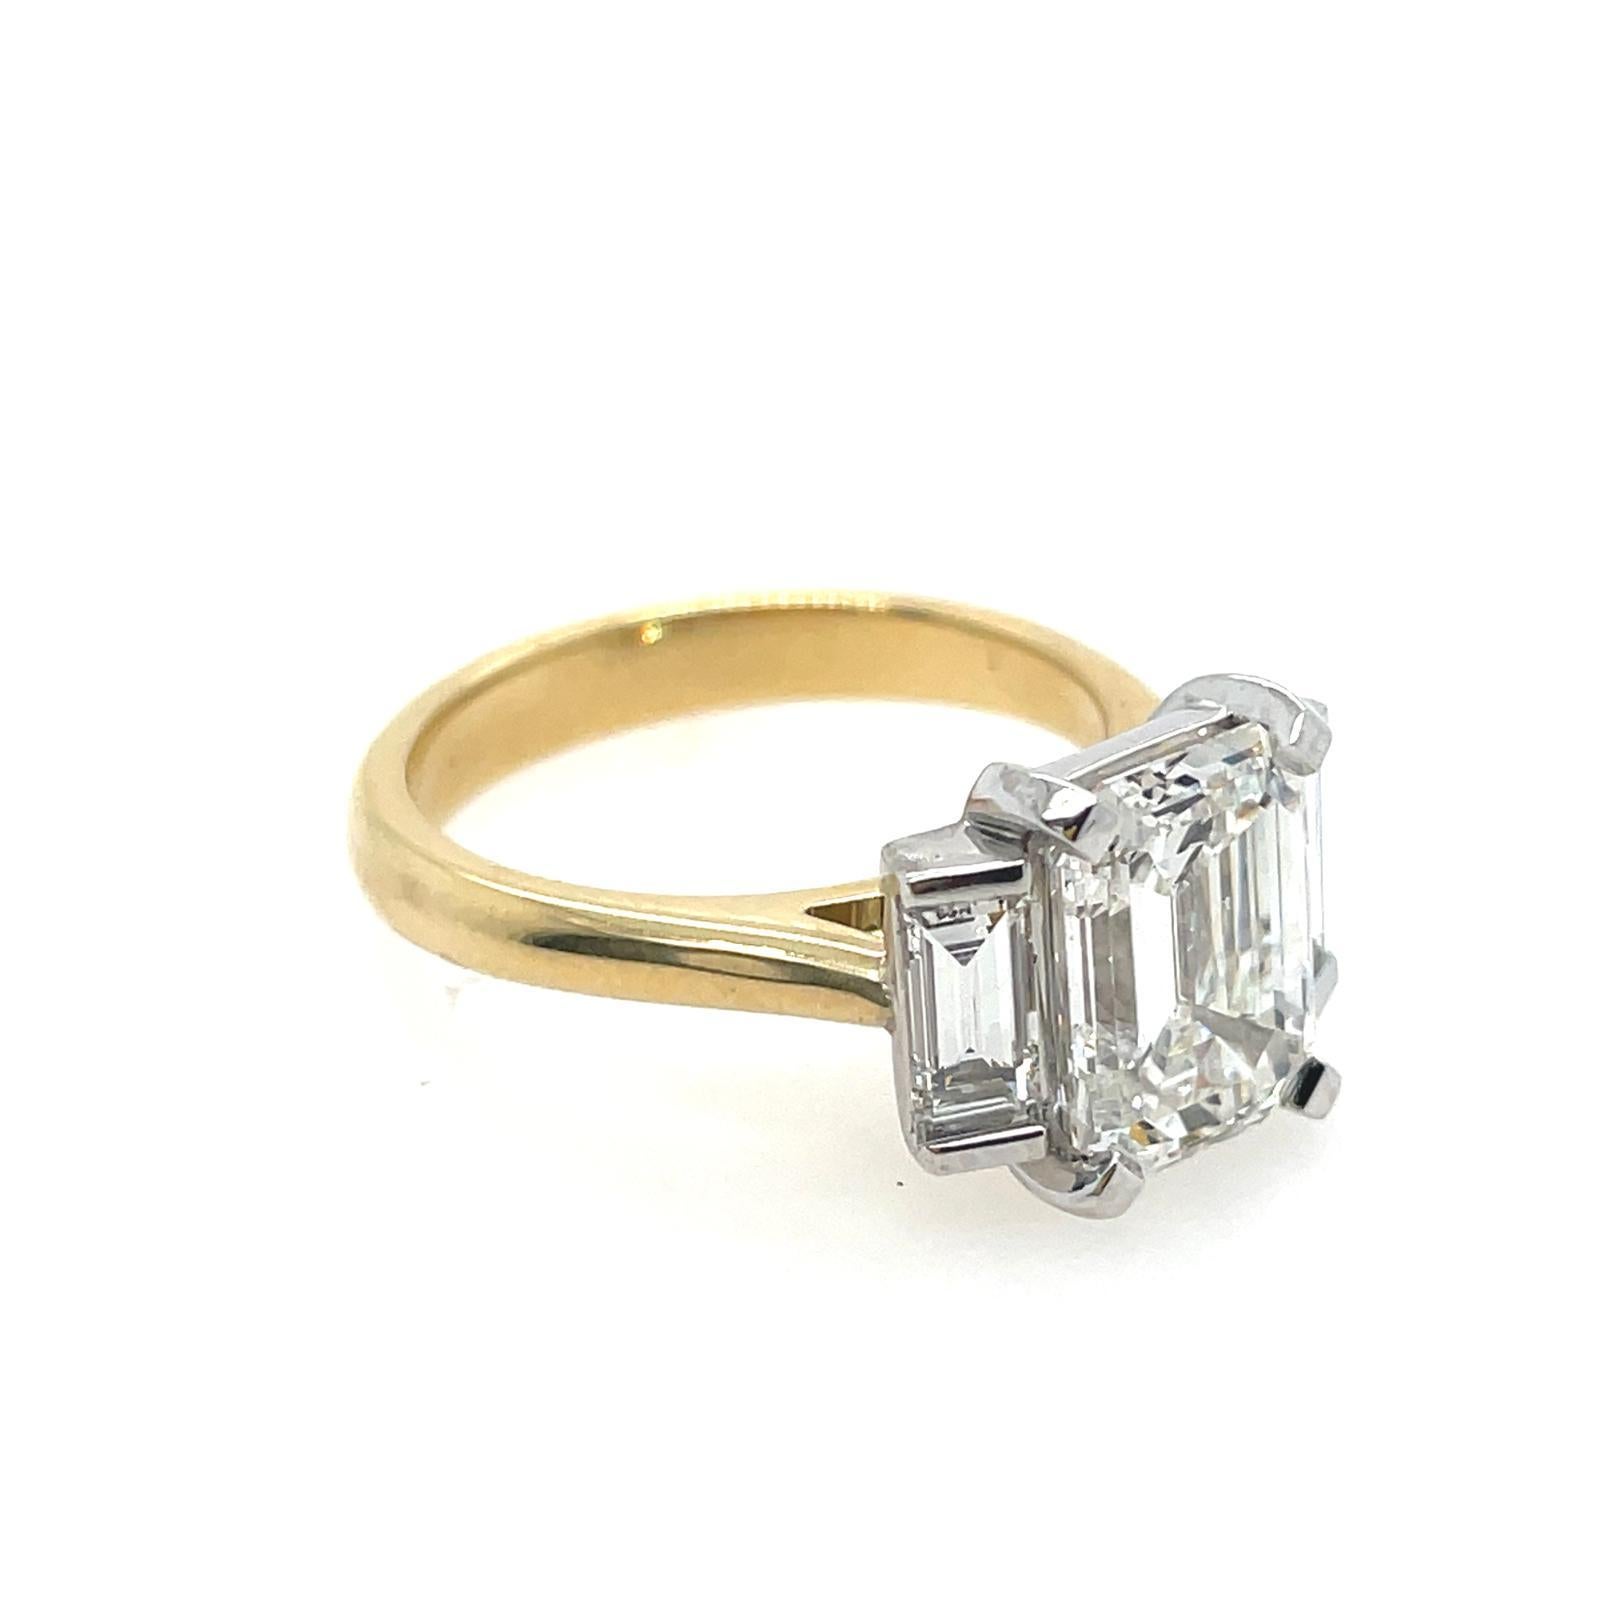 Custom made to order to your finger size. 18k white and yellow gold three stone ring featuring a 2ct emerald cut white diamond FVS2 (or a specific grade you prefer) with a pair of FVS baguette diamonds flanked either side.

A classic half round